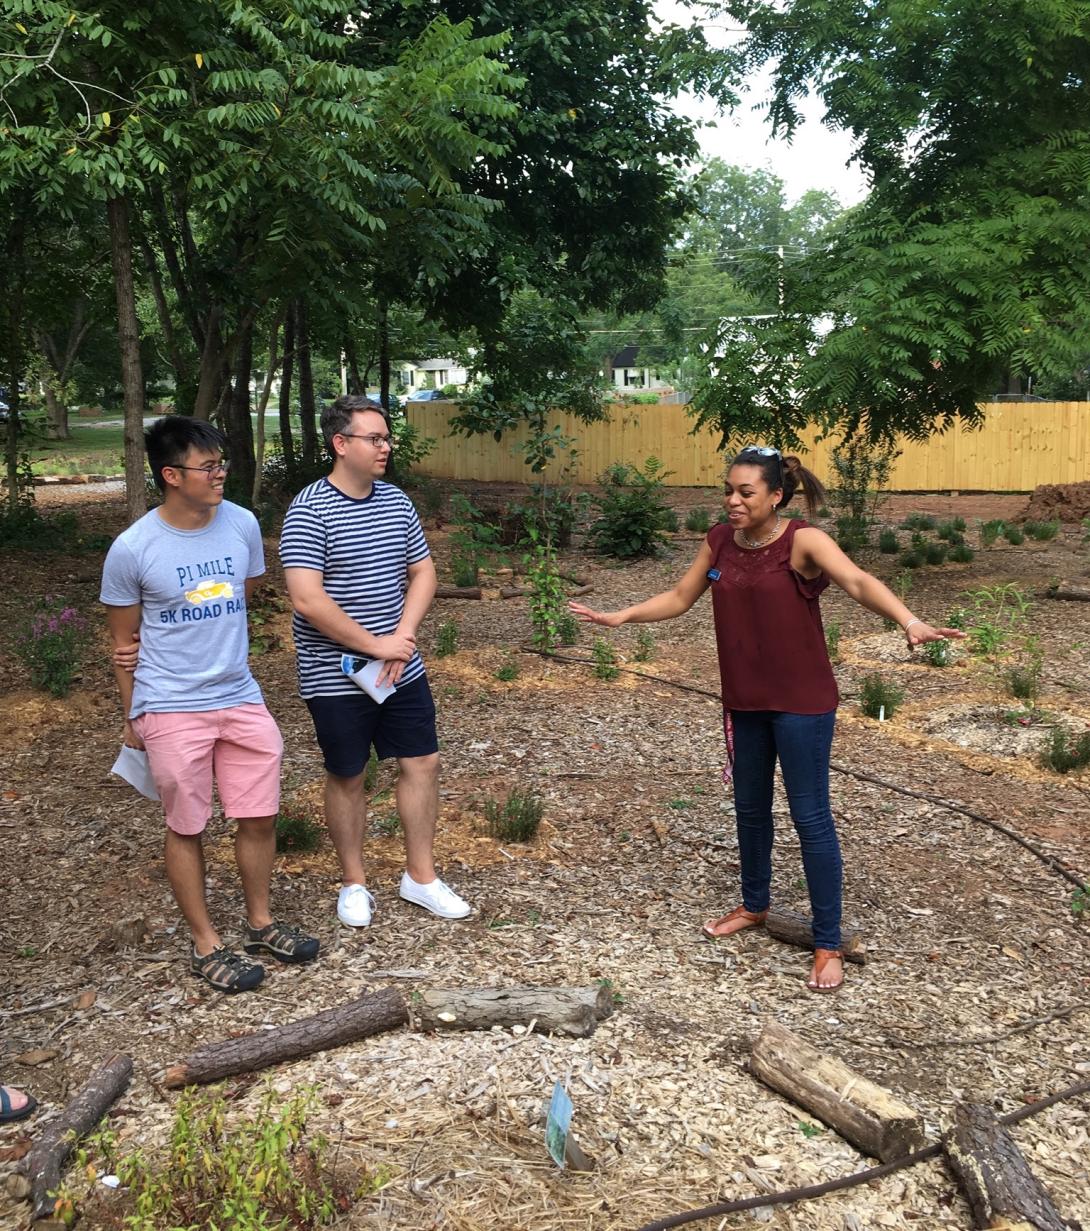 Students in the 2019 cohort of the SLS Summer Internship program touring the Urban Food Forest at Browns Mill.